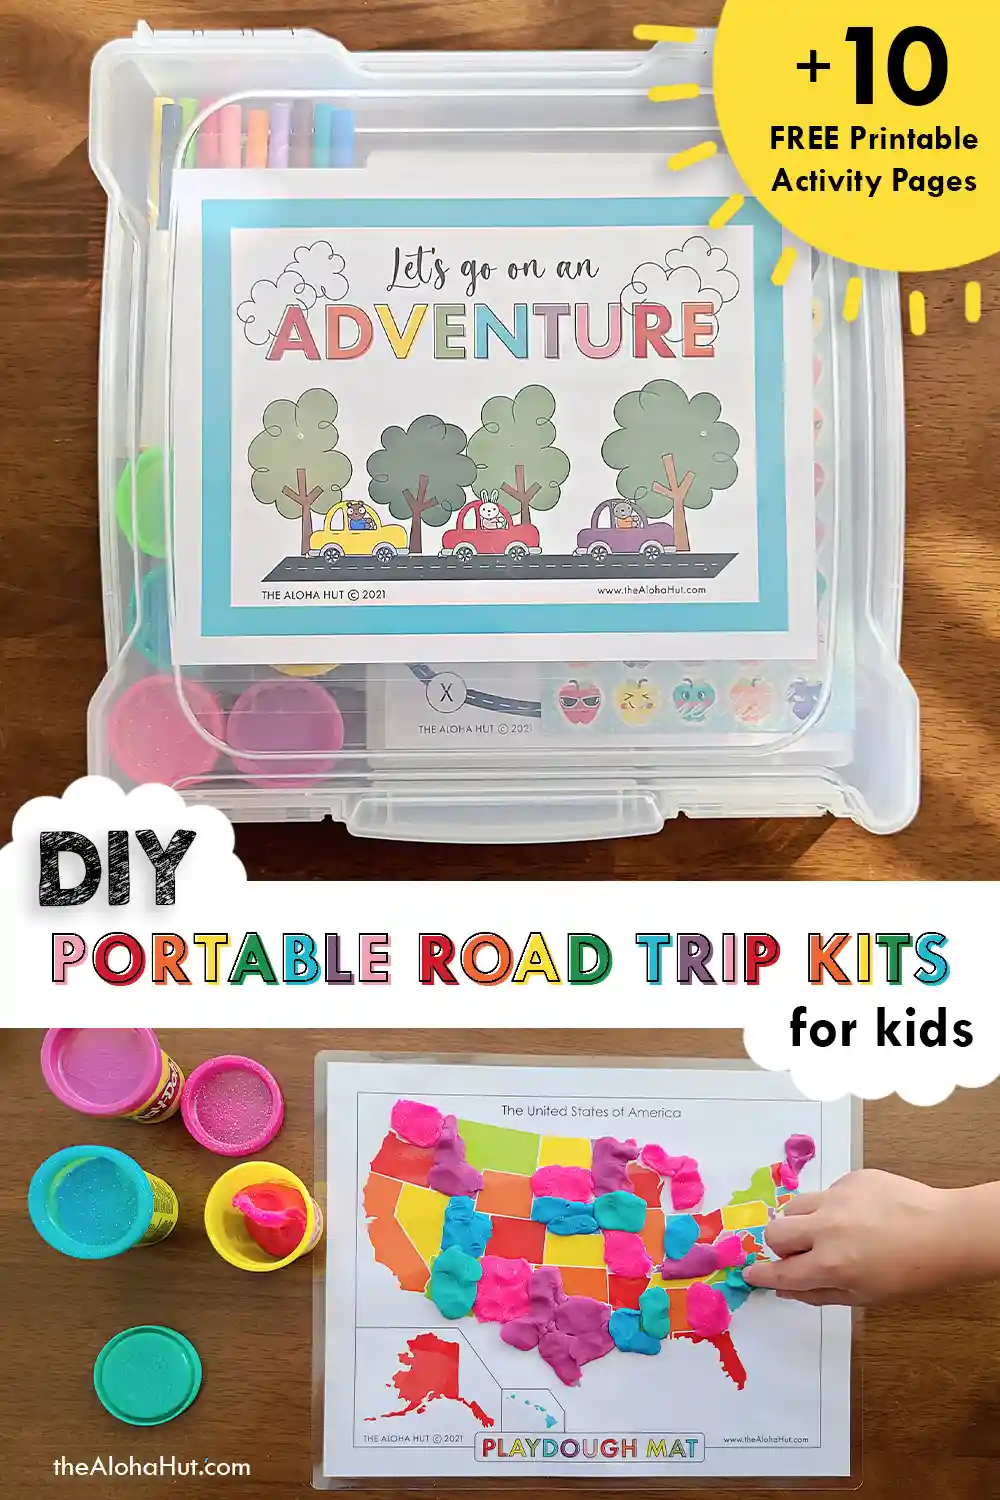 DIY Printable Travel Game Book for hours of fun! - Cucicucicoo